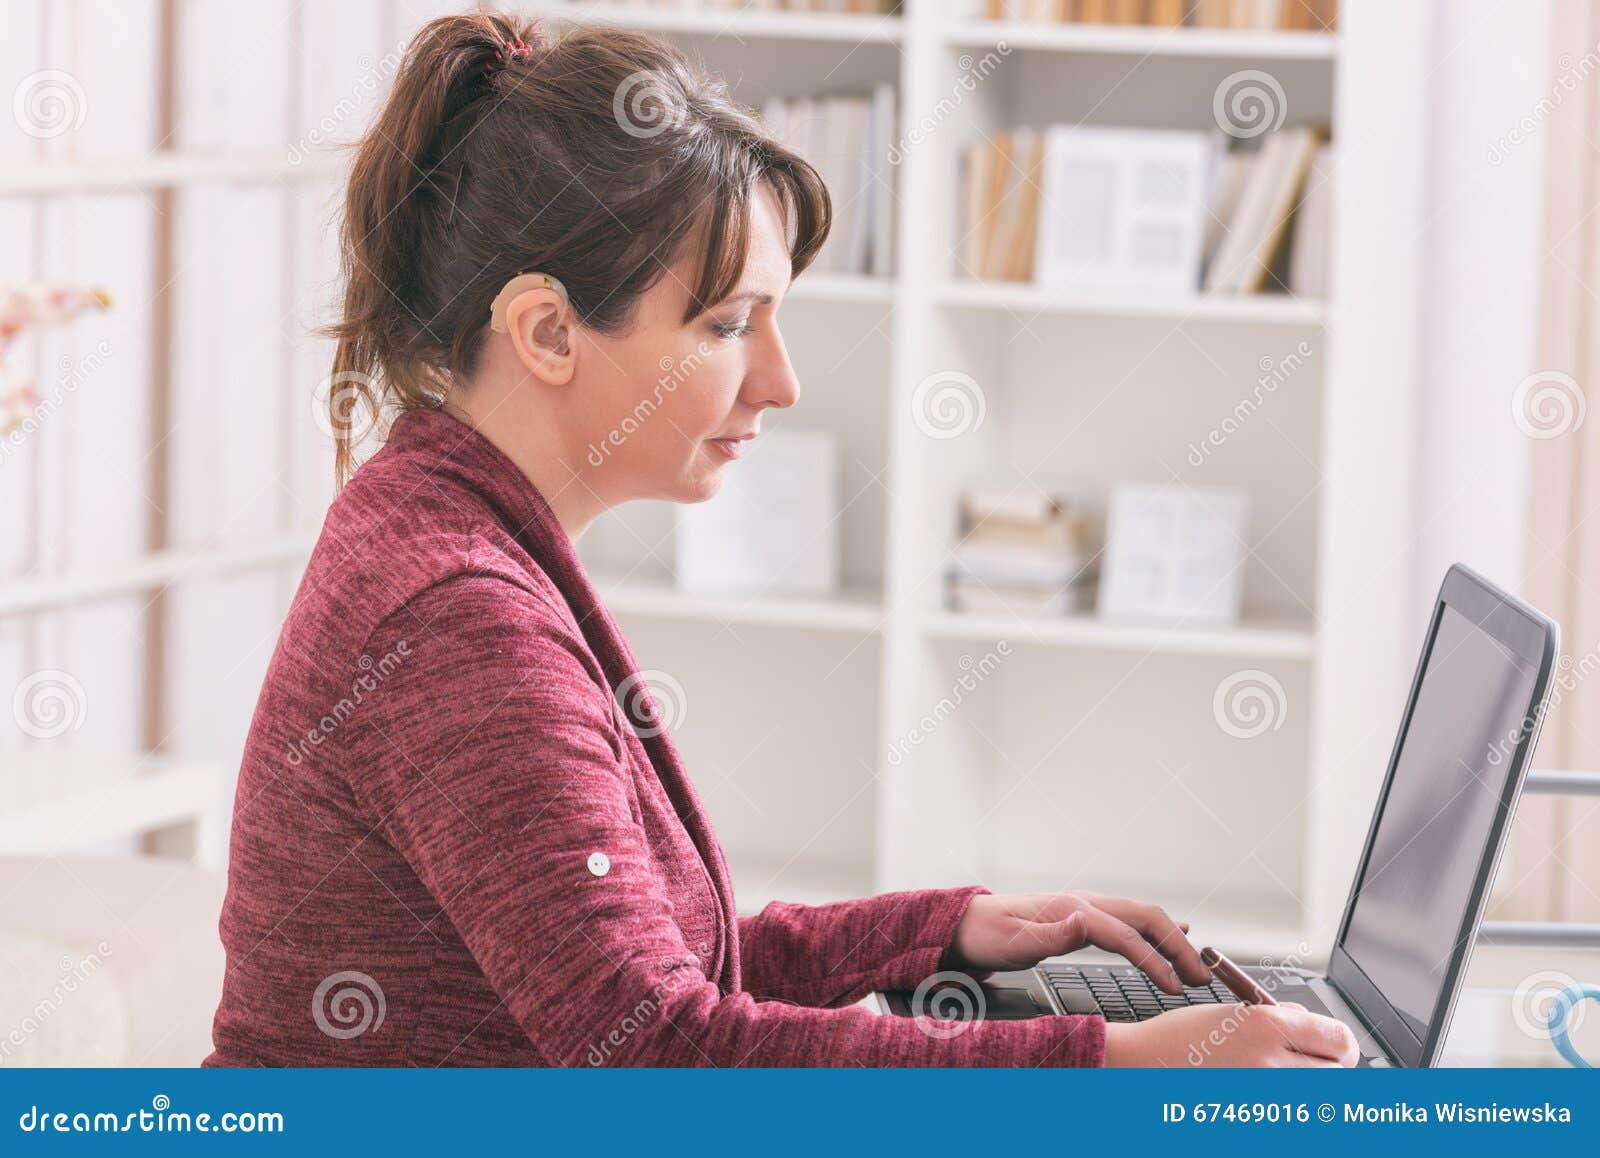 hearing impaired woman working with laptop